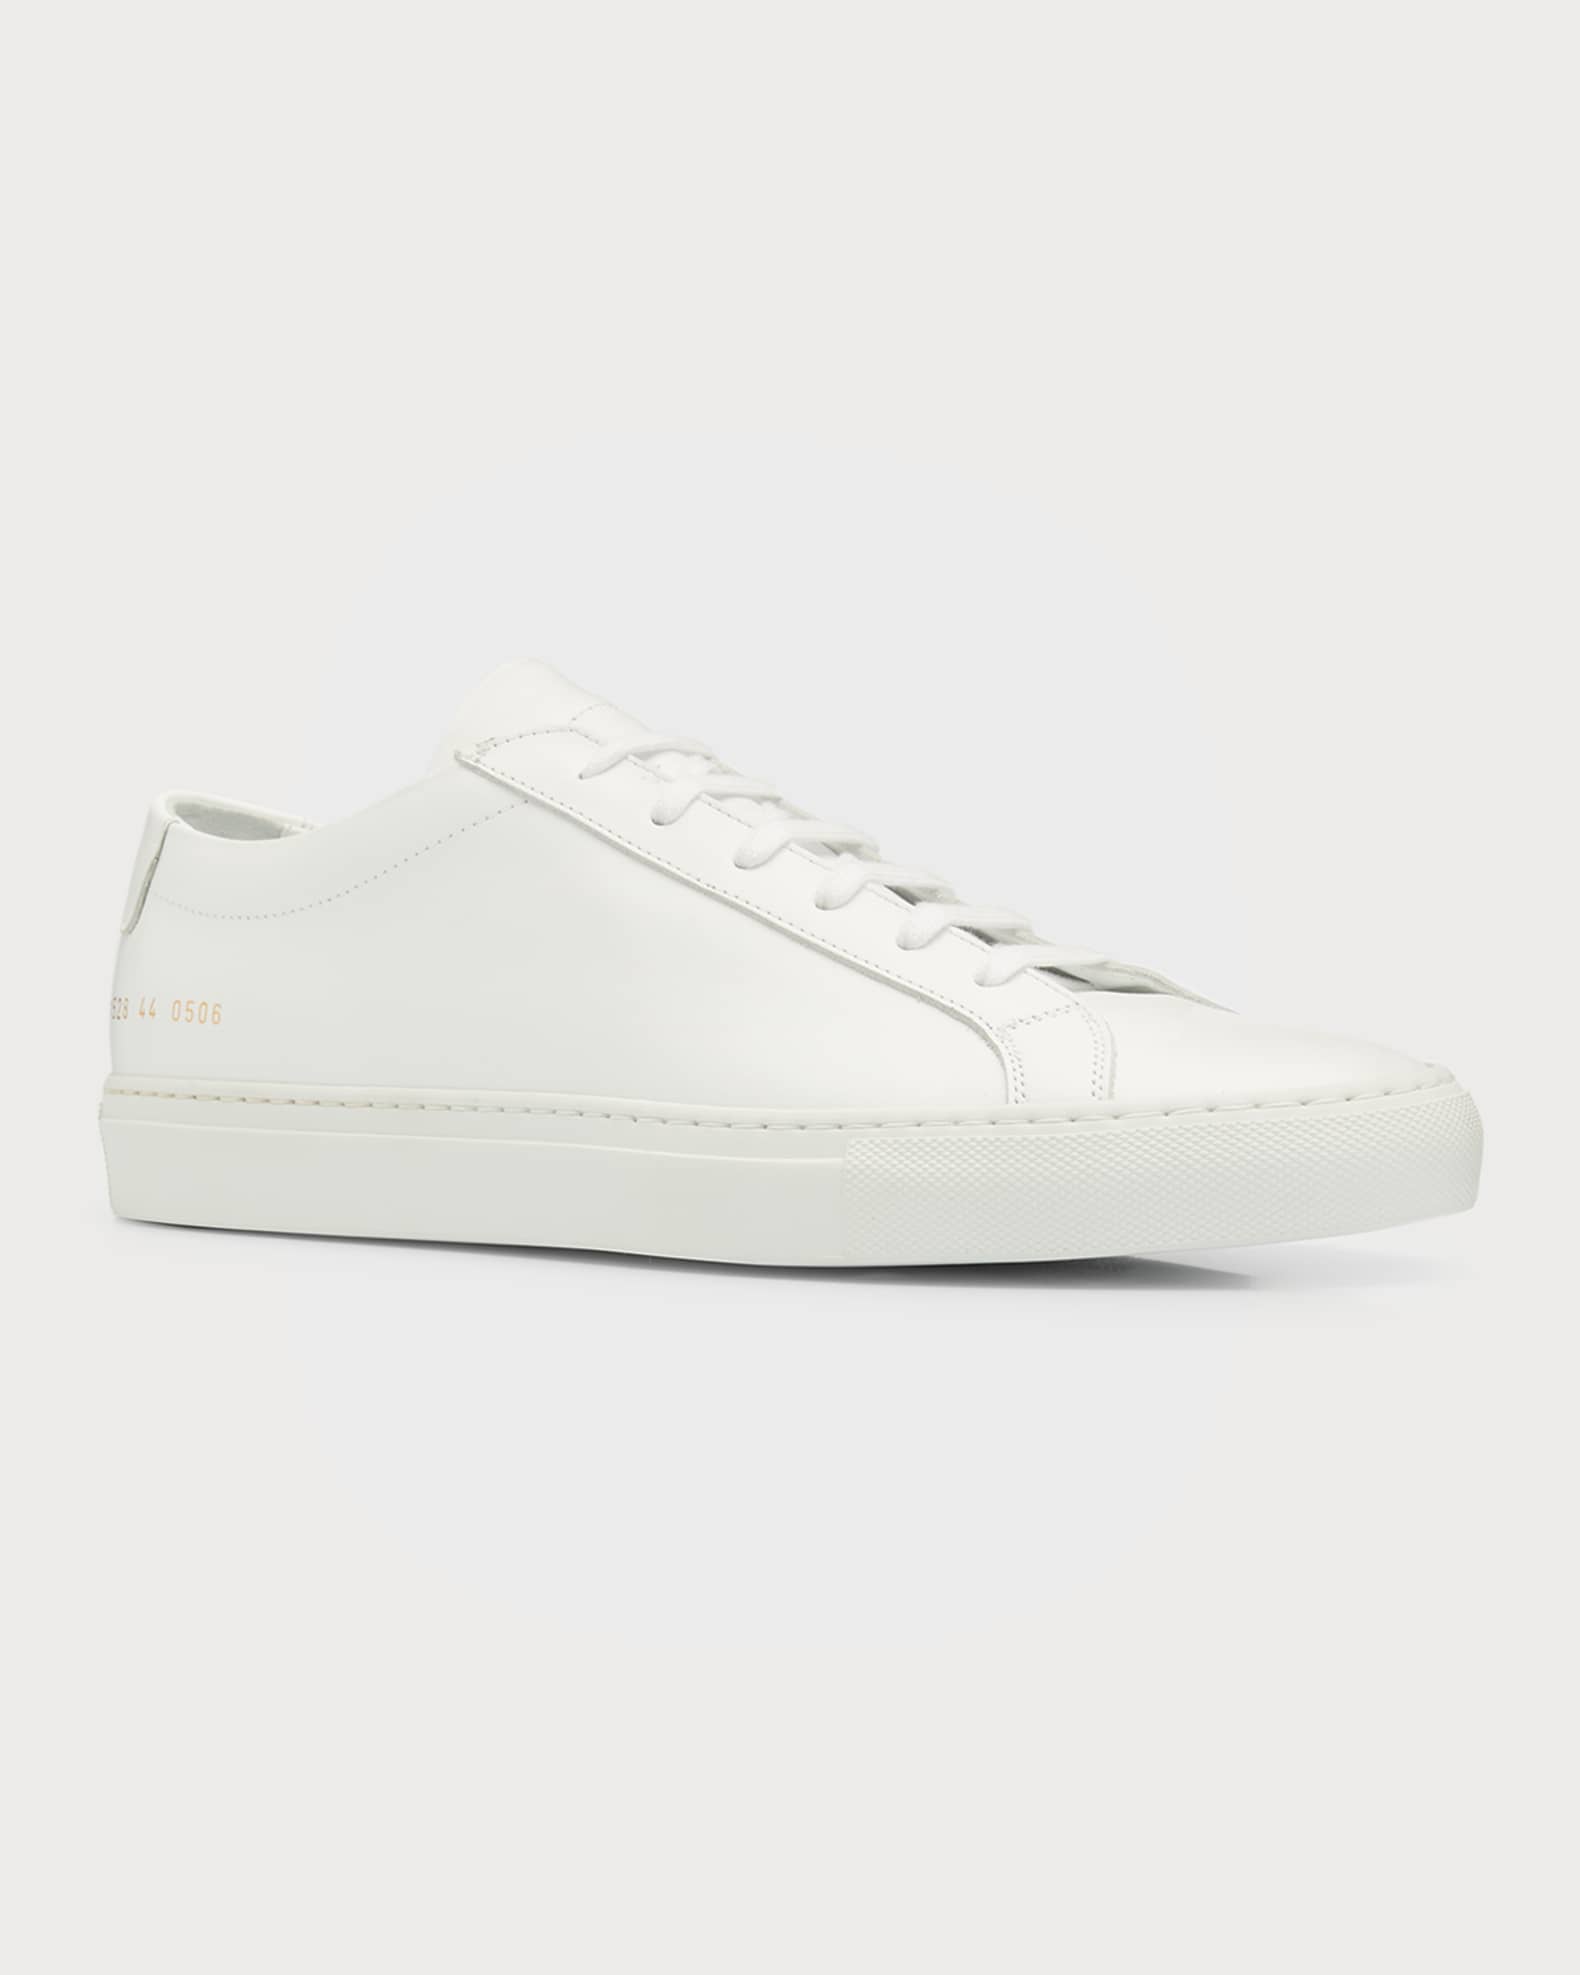 Common Projects Men's Achilles Leather Low-Top Sneakers, White Neiman Marcus